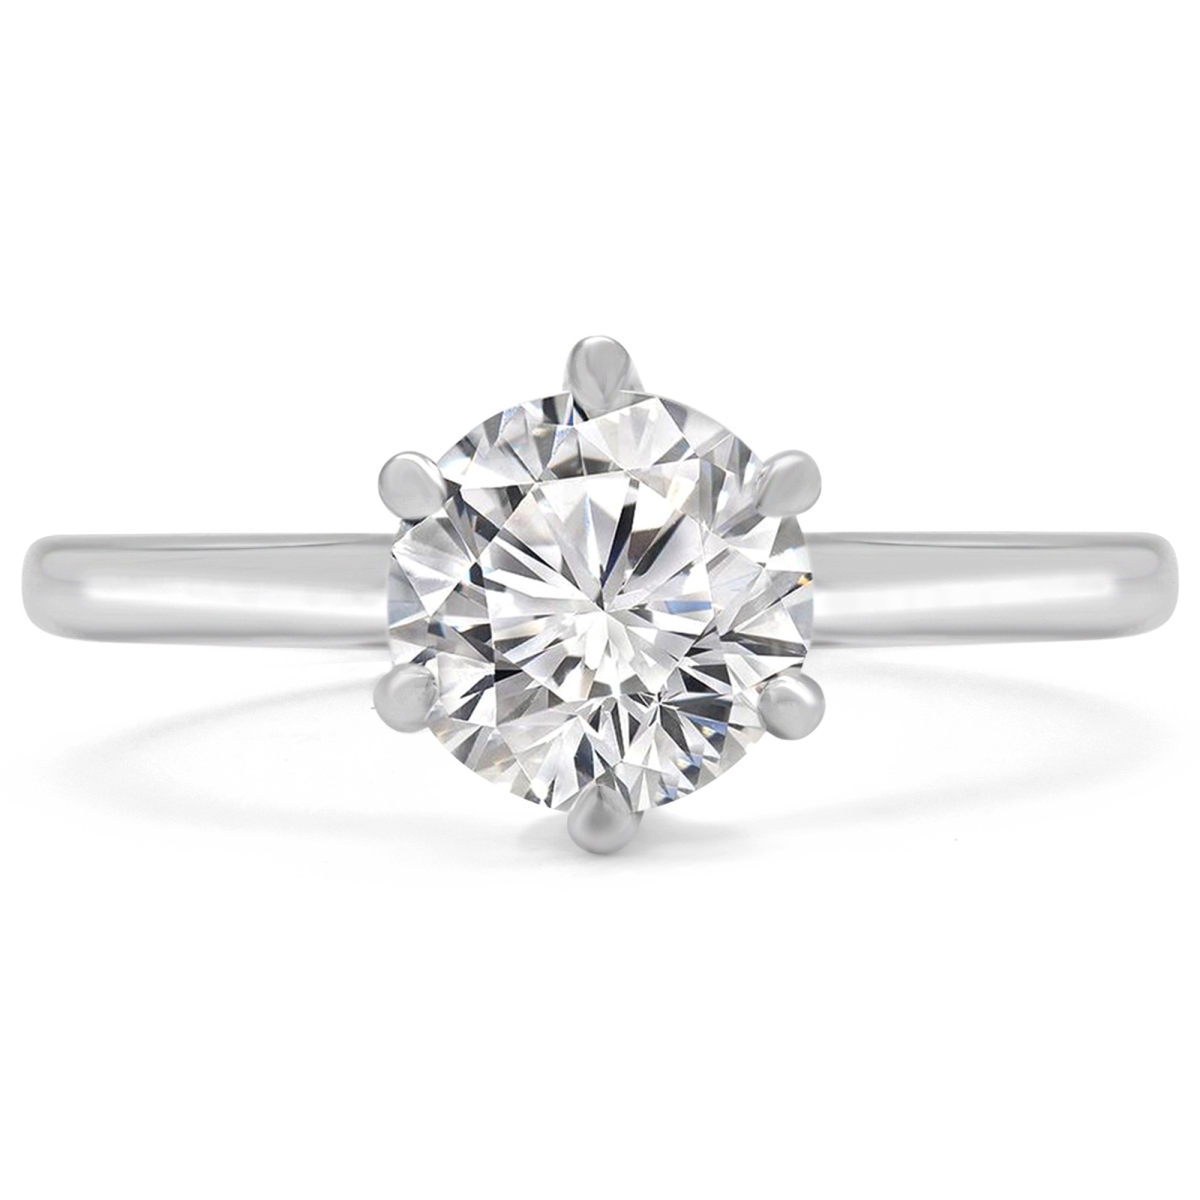 Picture of Majesty Diamonds MD190169-P 0.75 CT Round Diamond 6-Prong Solitaire Engagement Ring in 14K White Gold